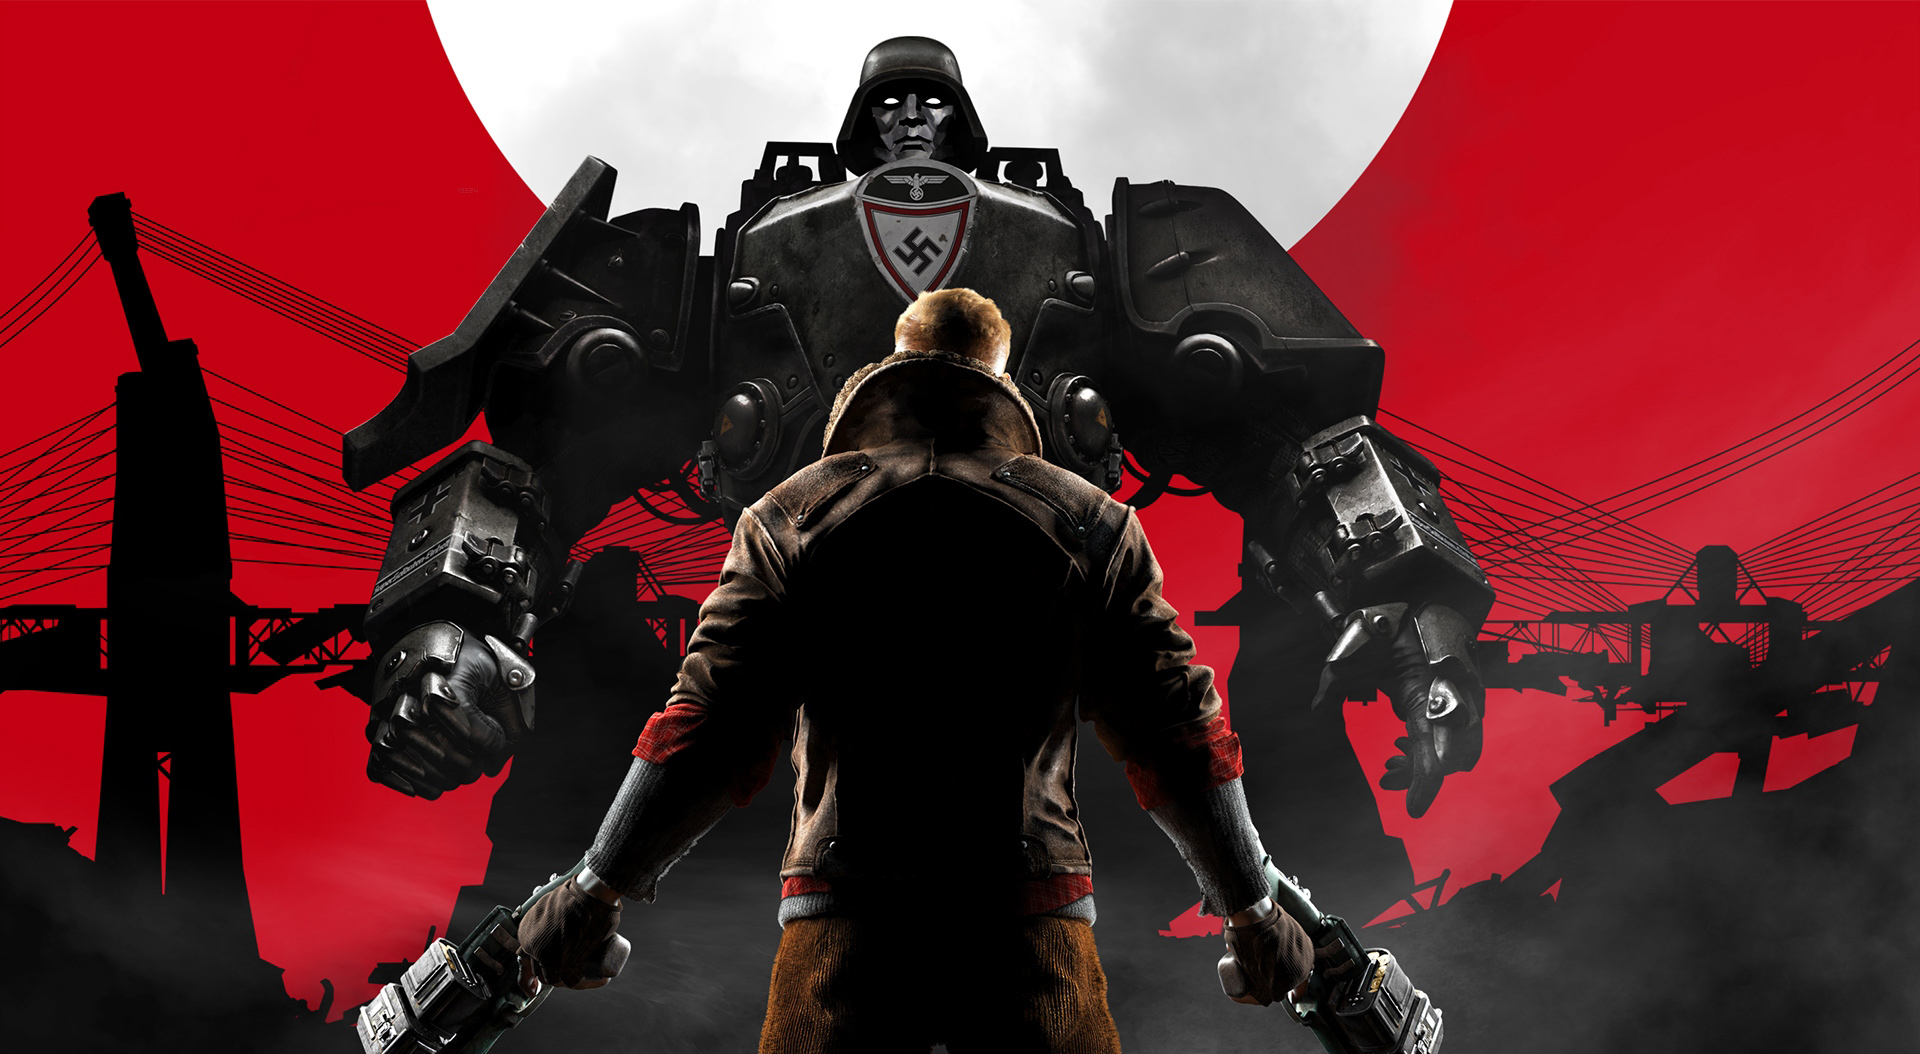 Nice Images Collection: Wolfenstein: The New Order Desktop Wallpapers